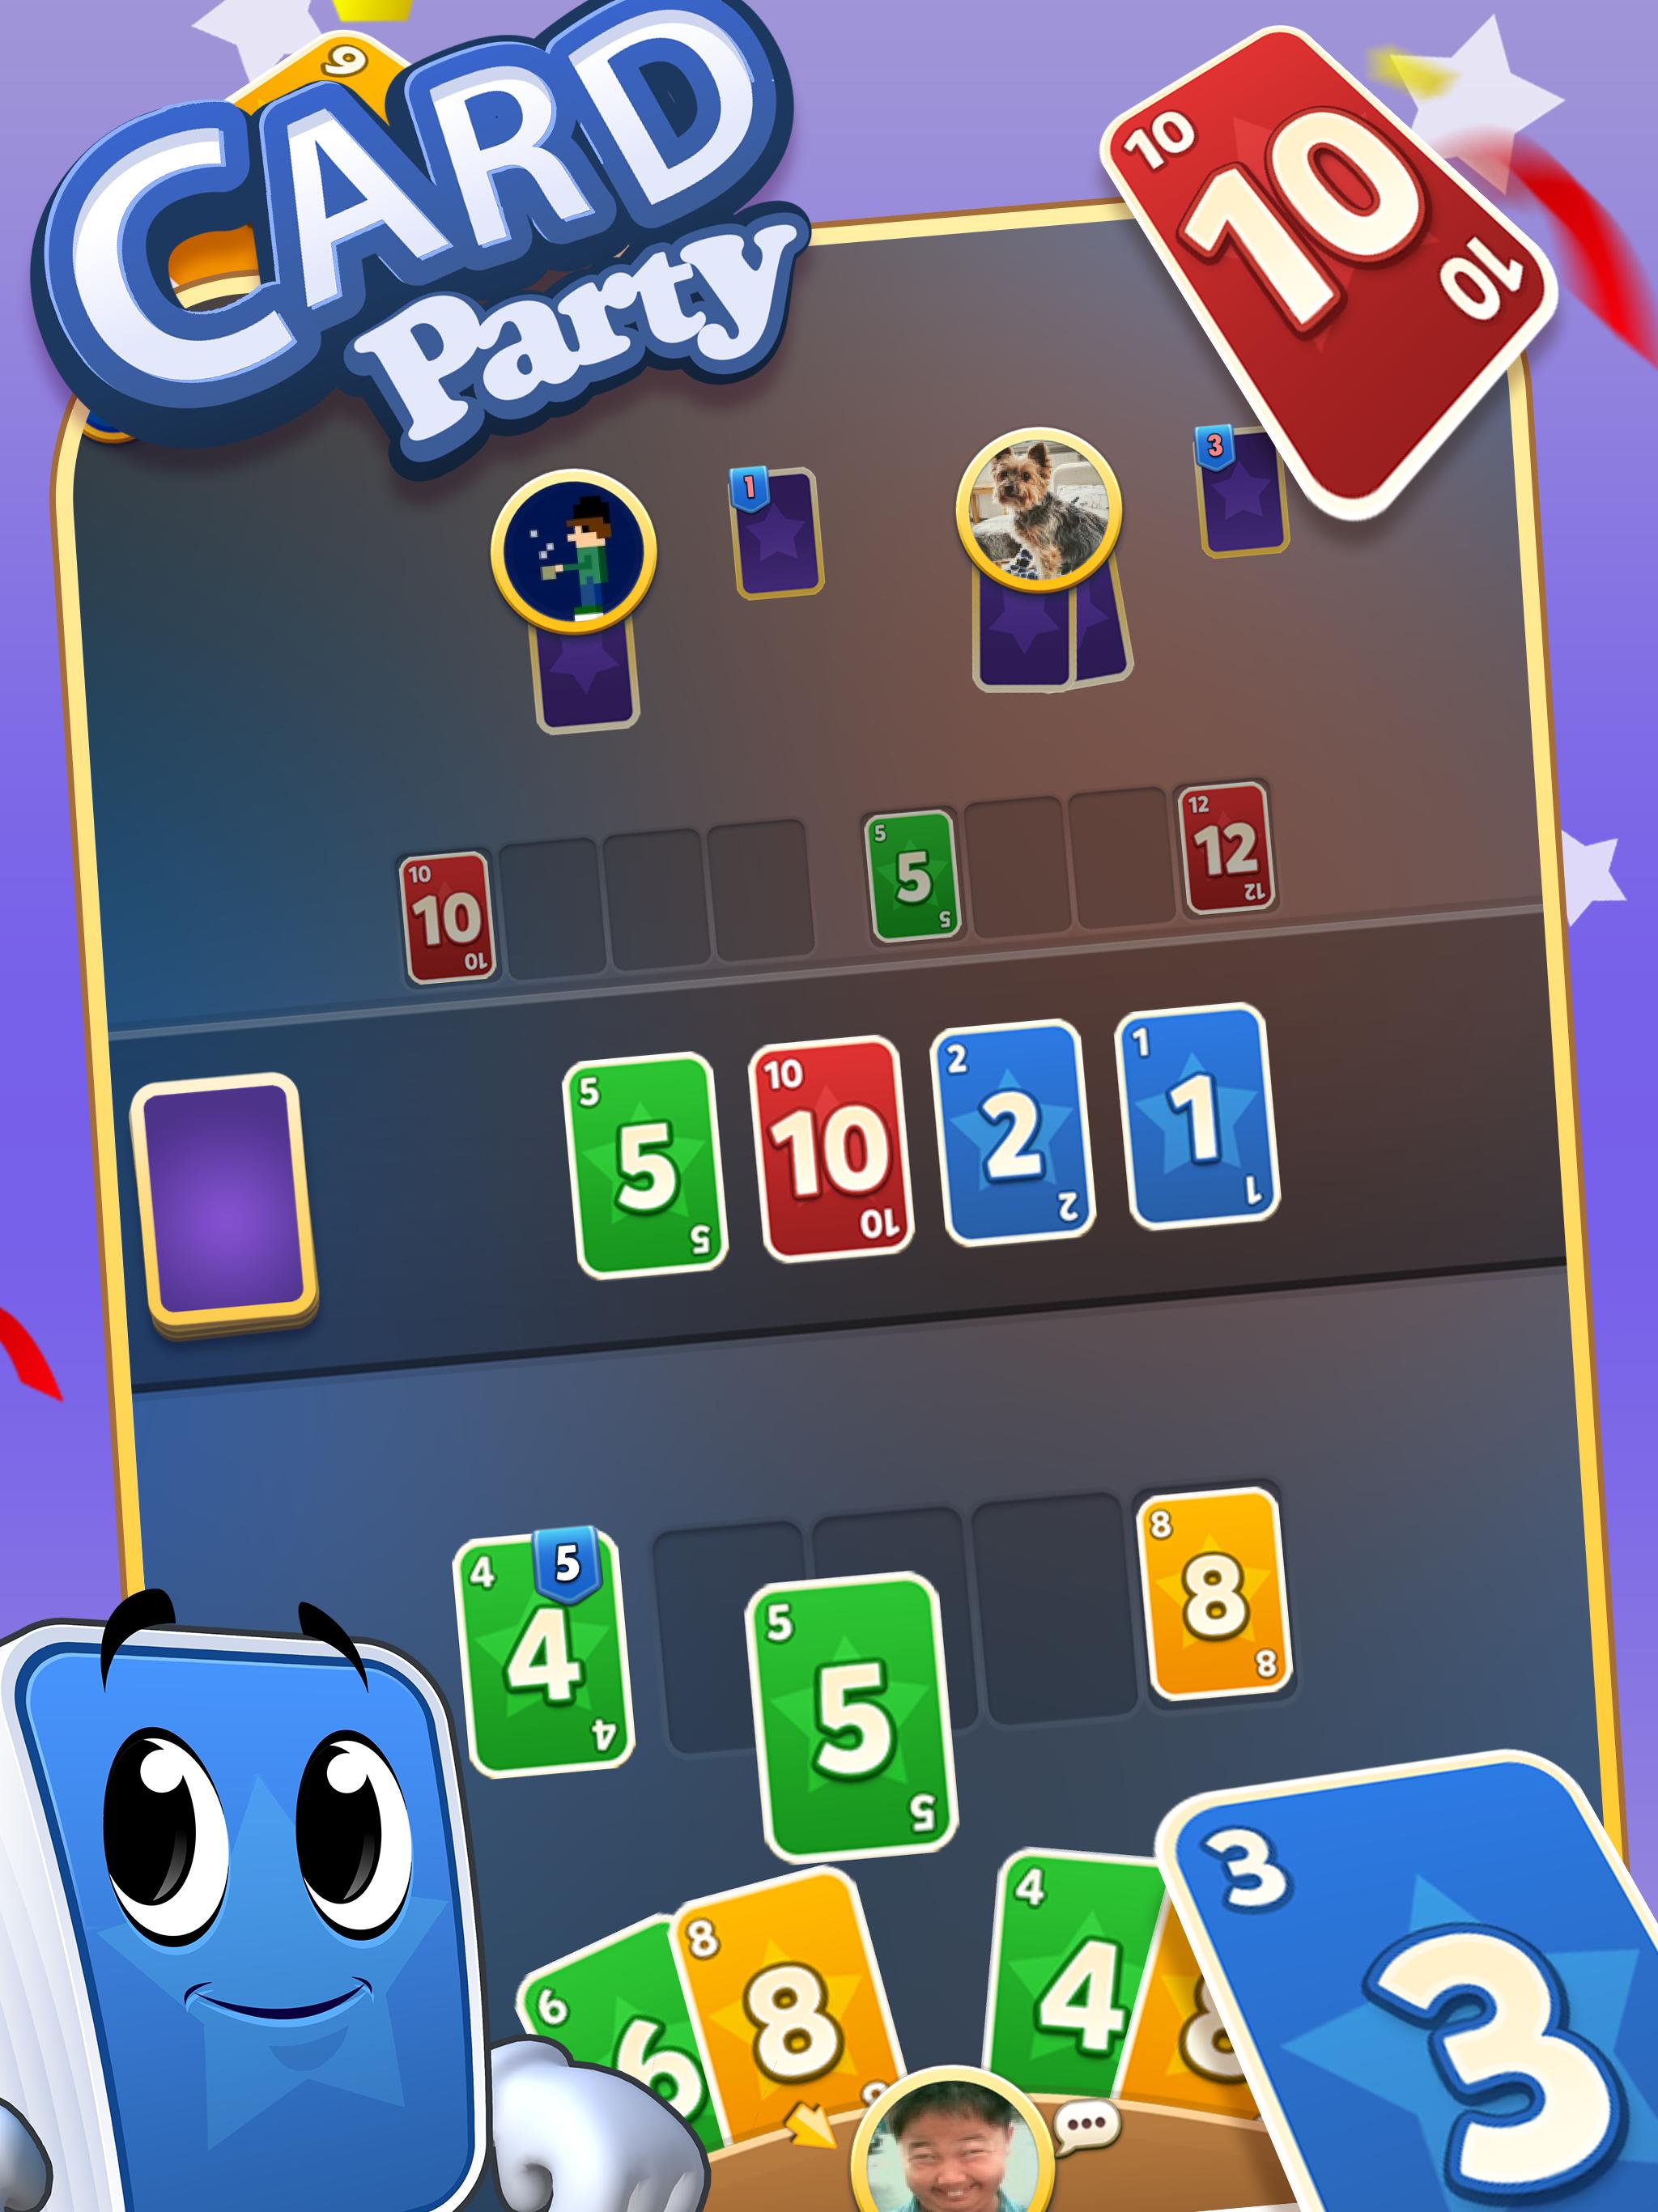 GamePoint CardParty 24357 Screenshot 5